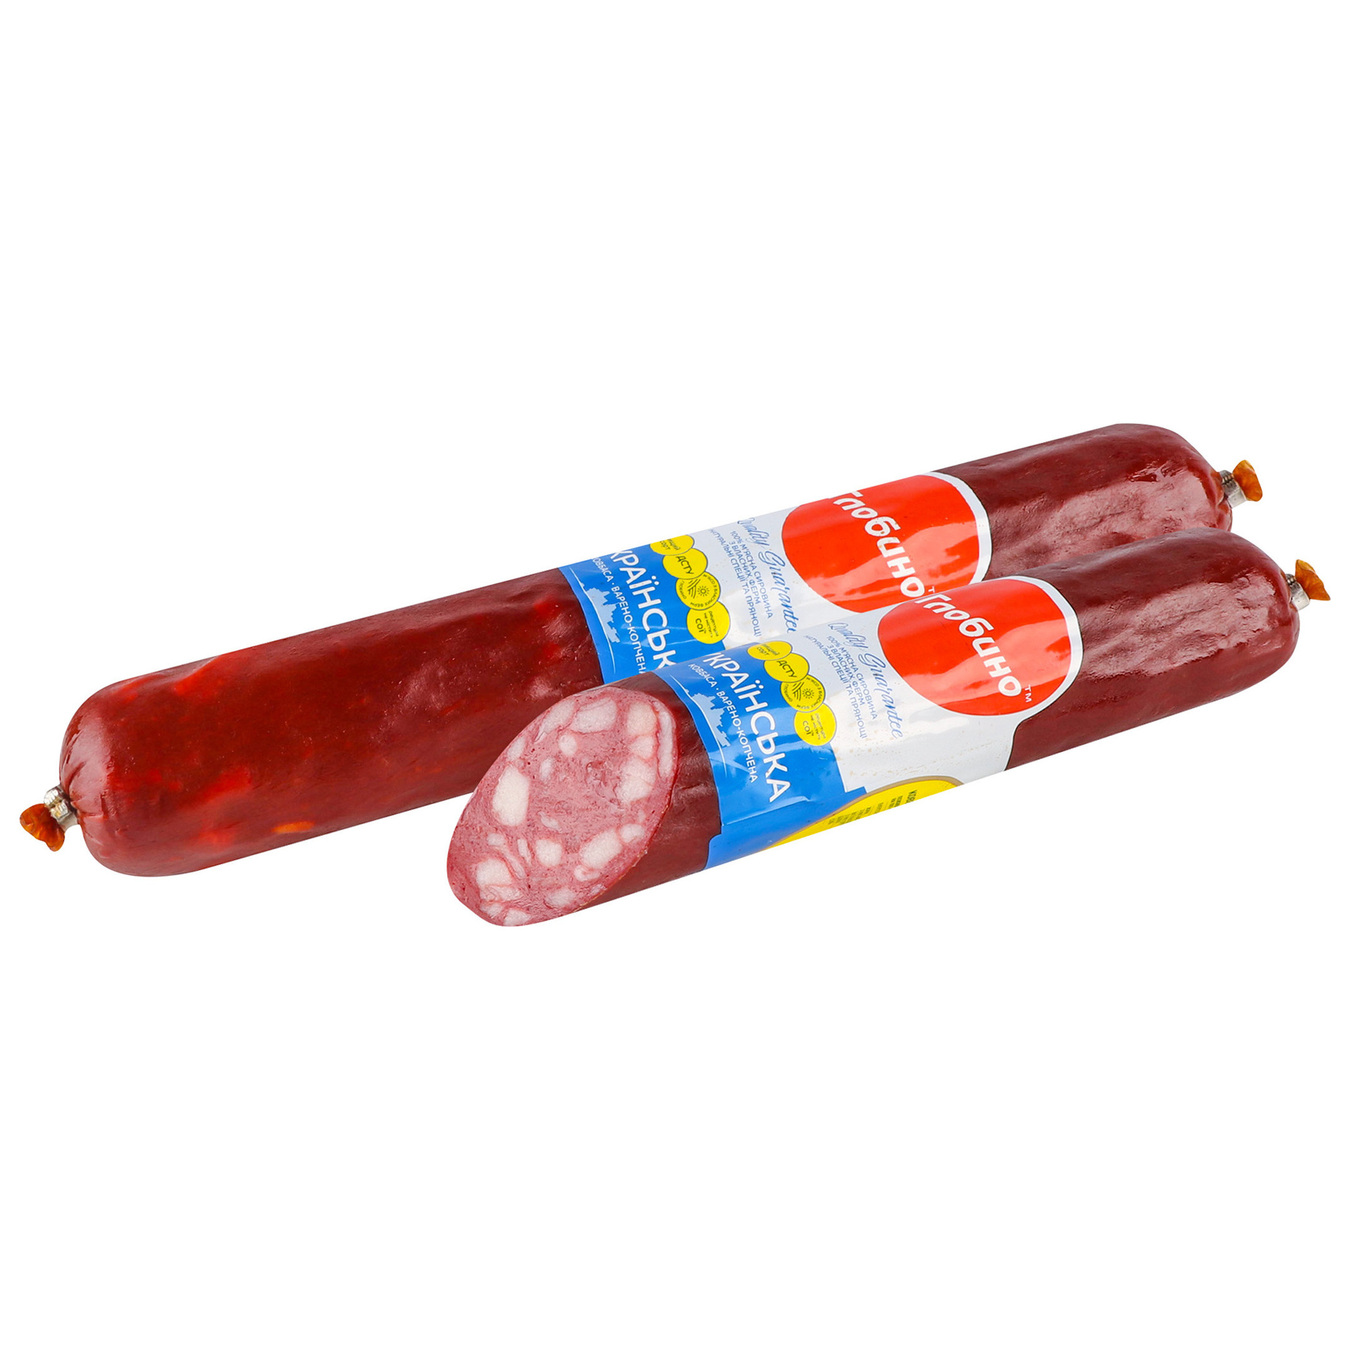 Globino Ukrainian sausage cooked and smoked of the highest quality 460g 2